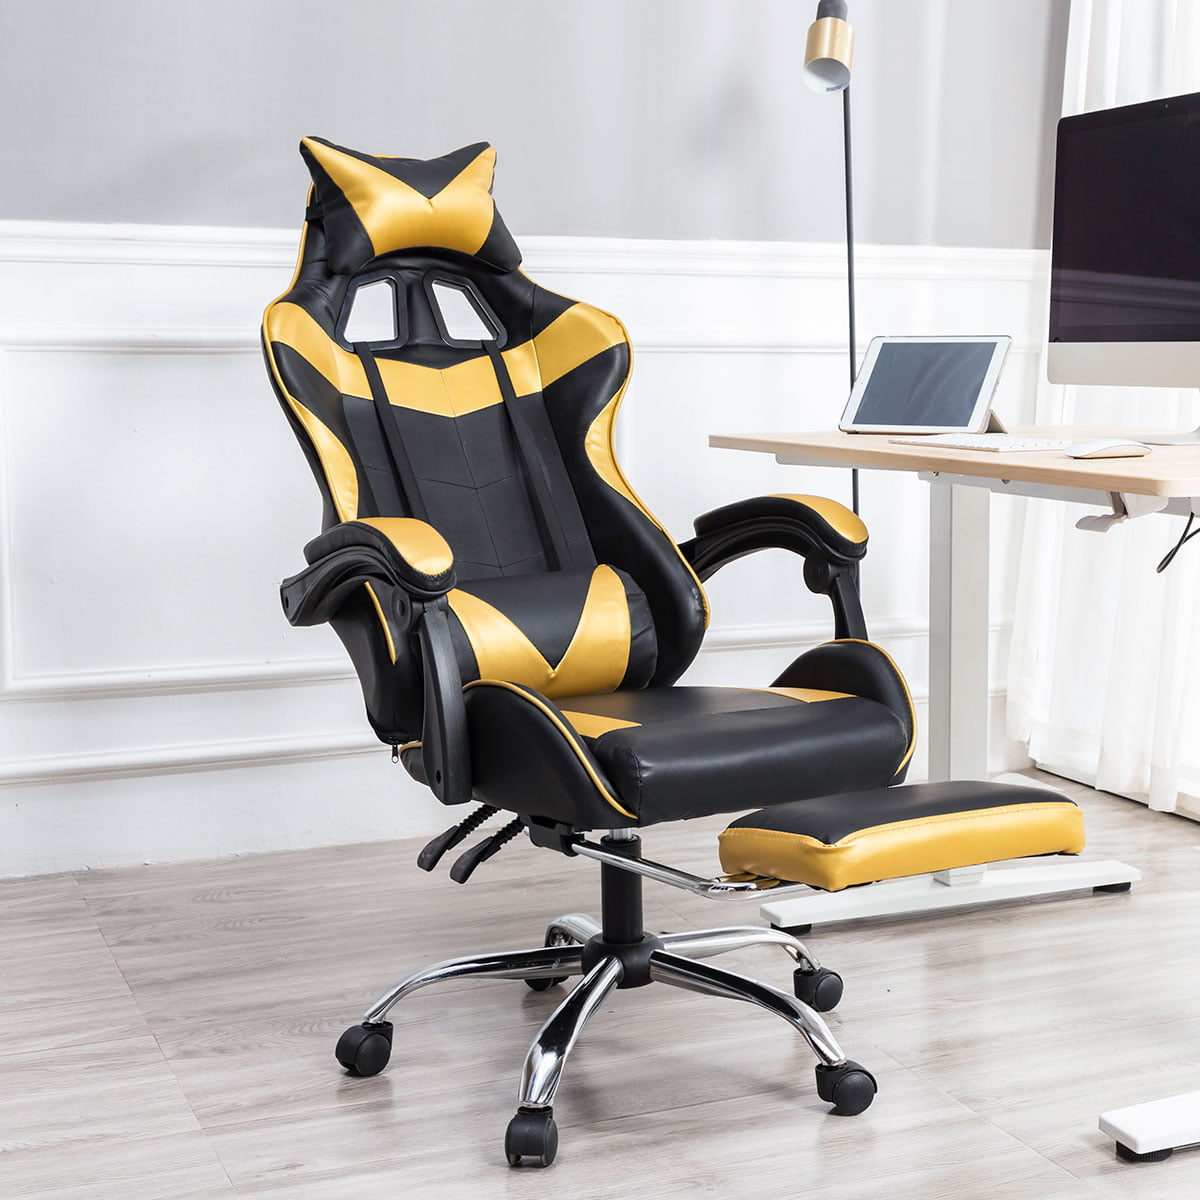 Details about   Office Chair Executive Racing Gaming Chairs High Back Computer Desk Seat Swivel 